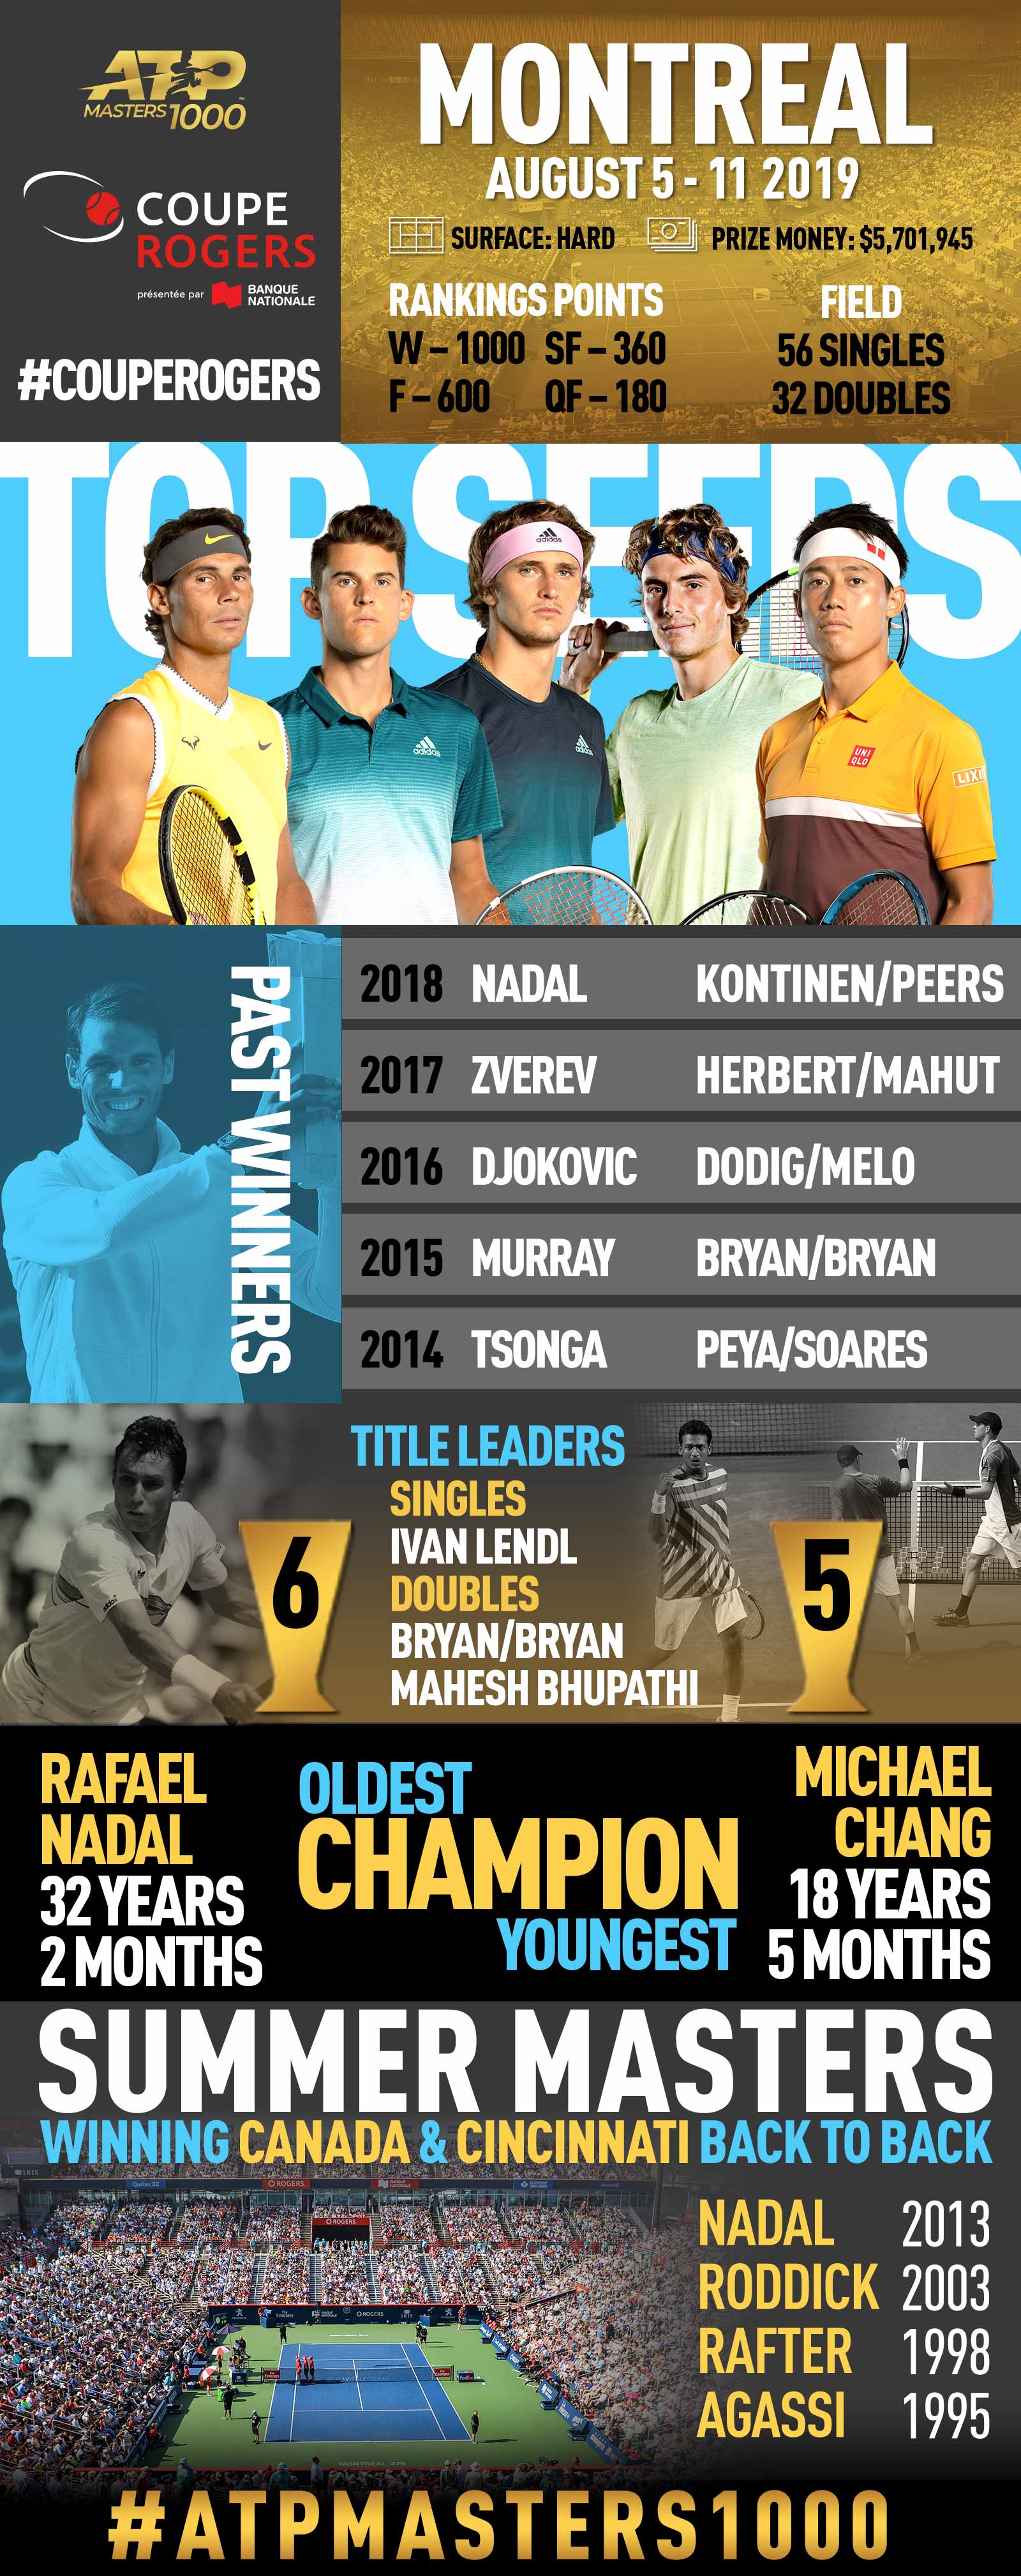 Rafael Nadal, Oldest Coupe Rogers Champion, Goes For Fifth Title In Canada; Facts and Figures ATP Tour Tennis